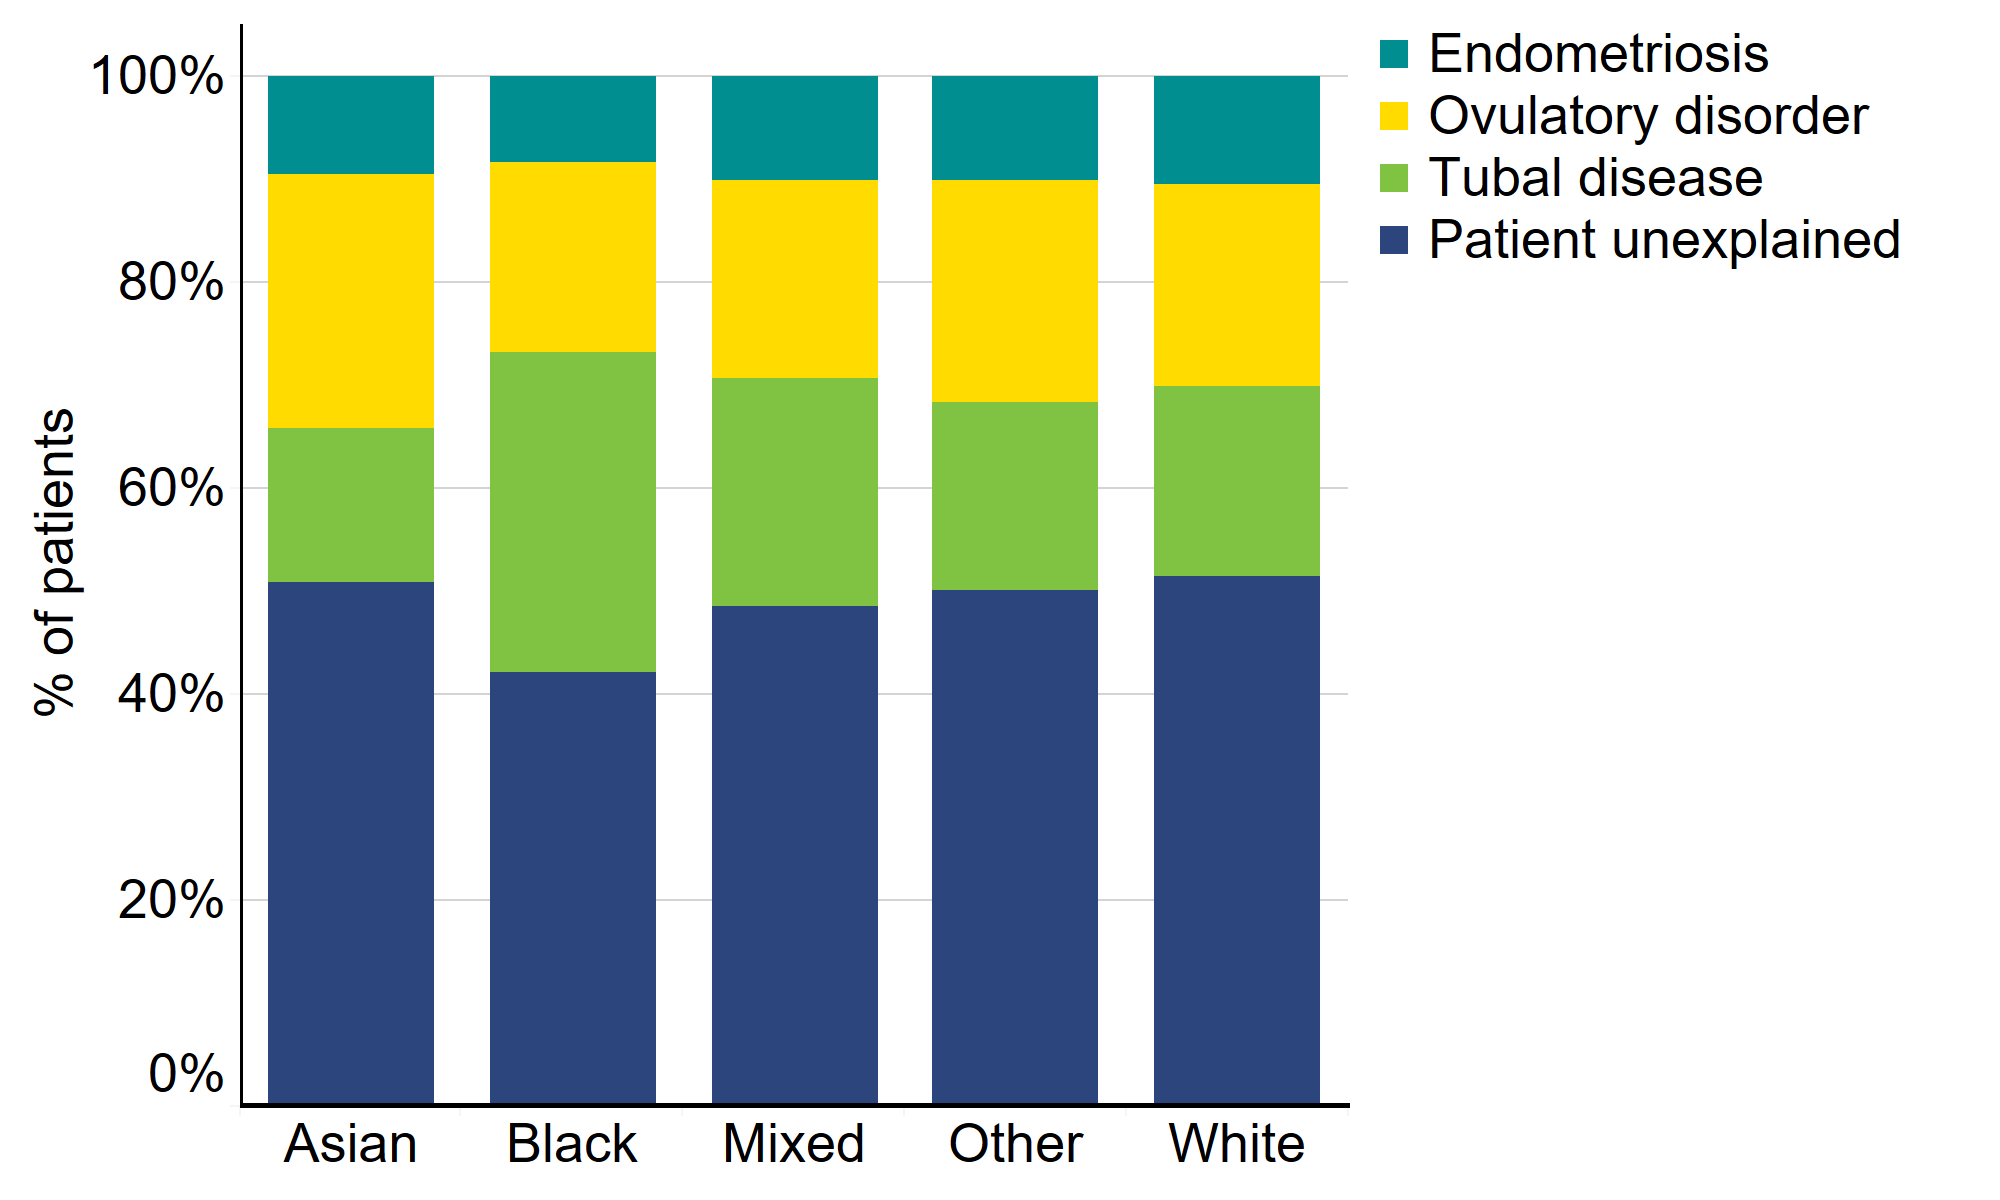 Proportion of patient-based infertility by ethnicity, 2014-2018. This stacked bar graph shows the proportion of patients with different types of infertility – endometriosis, ovulatory disorder, tubal disease and patient unexplained infertility – for each ethnic group. Patient unexplained infertility was the most common type of infertility in all ethnic groups. A higher proportion of Black patients had tubal disease than the other ethnic groups. Asian patients had the highest levels of ovulatory disorder.